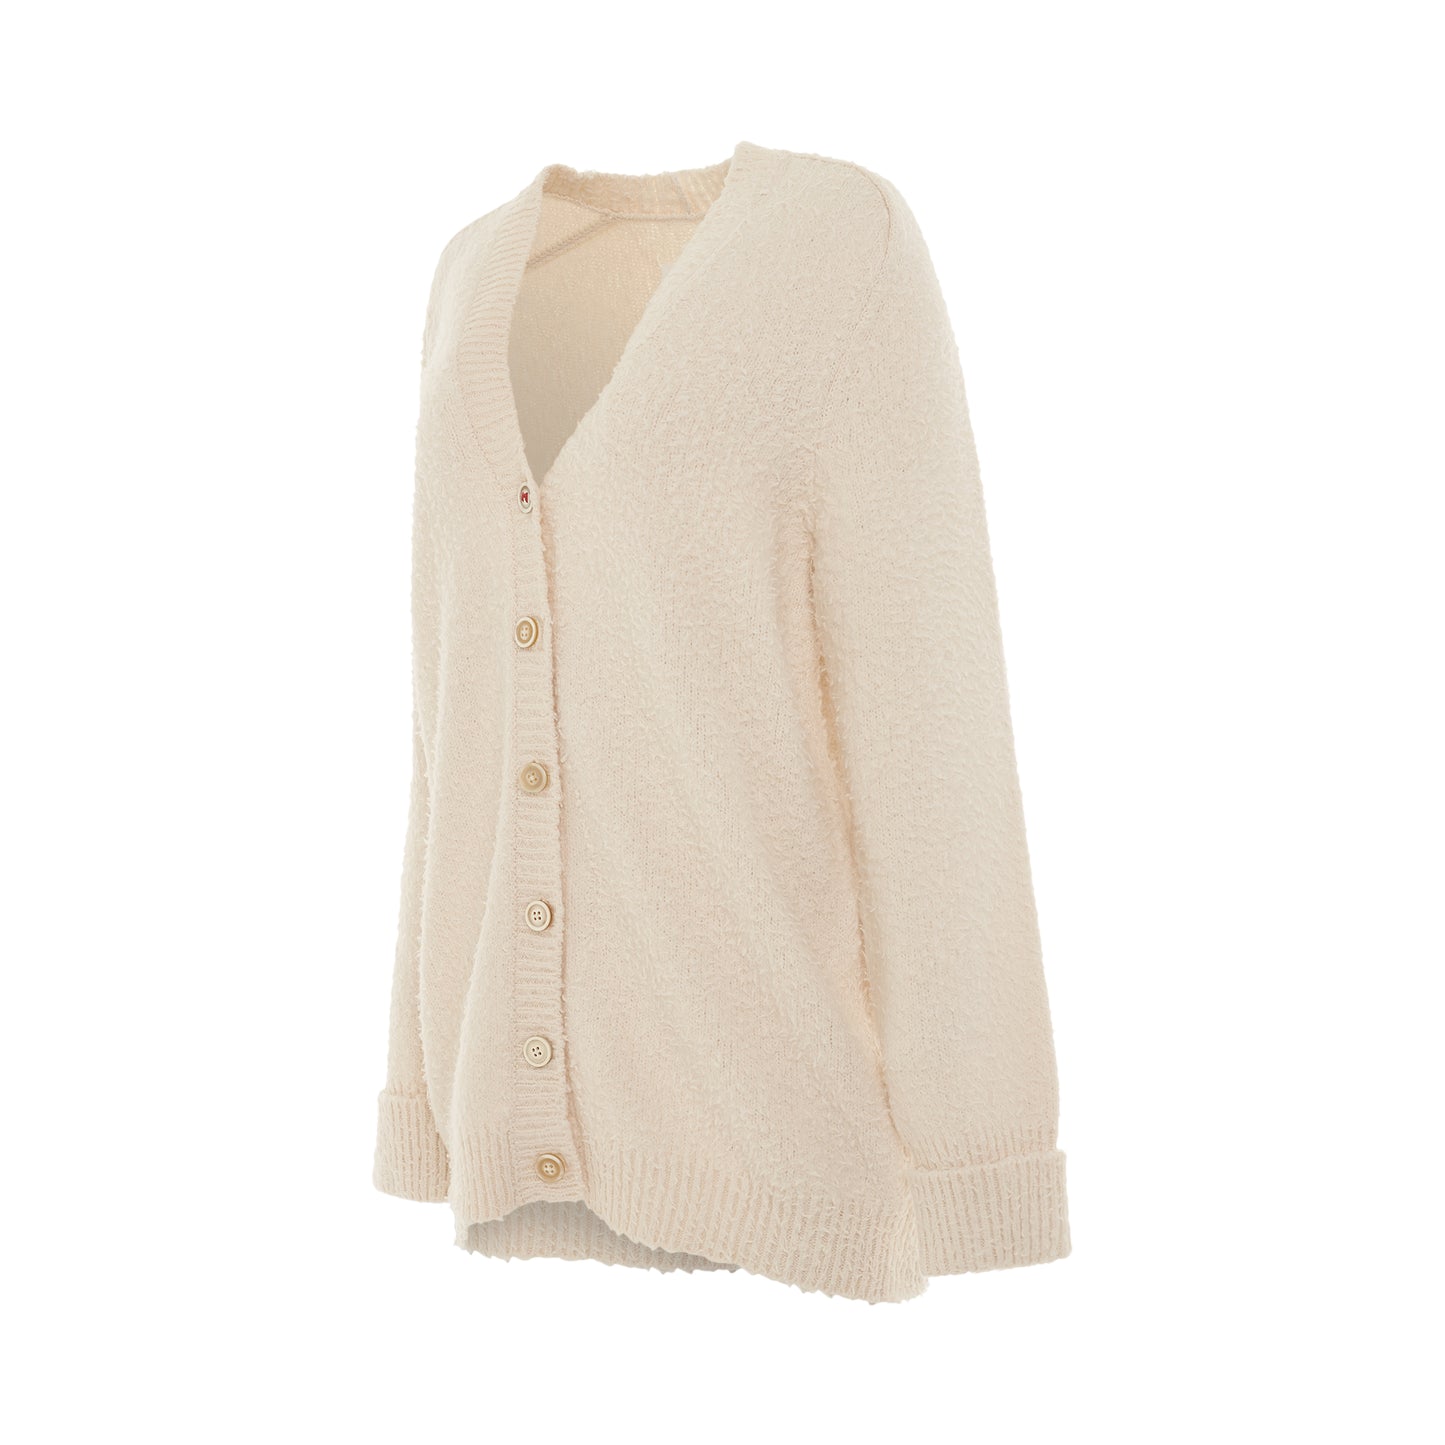 Oversized Piled Knit Cardigan in Off-White